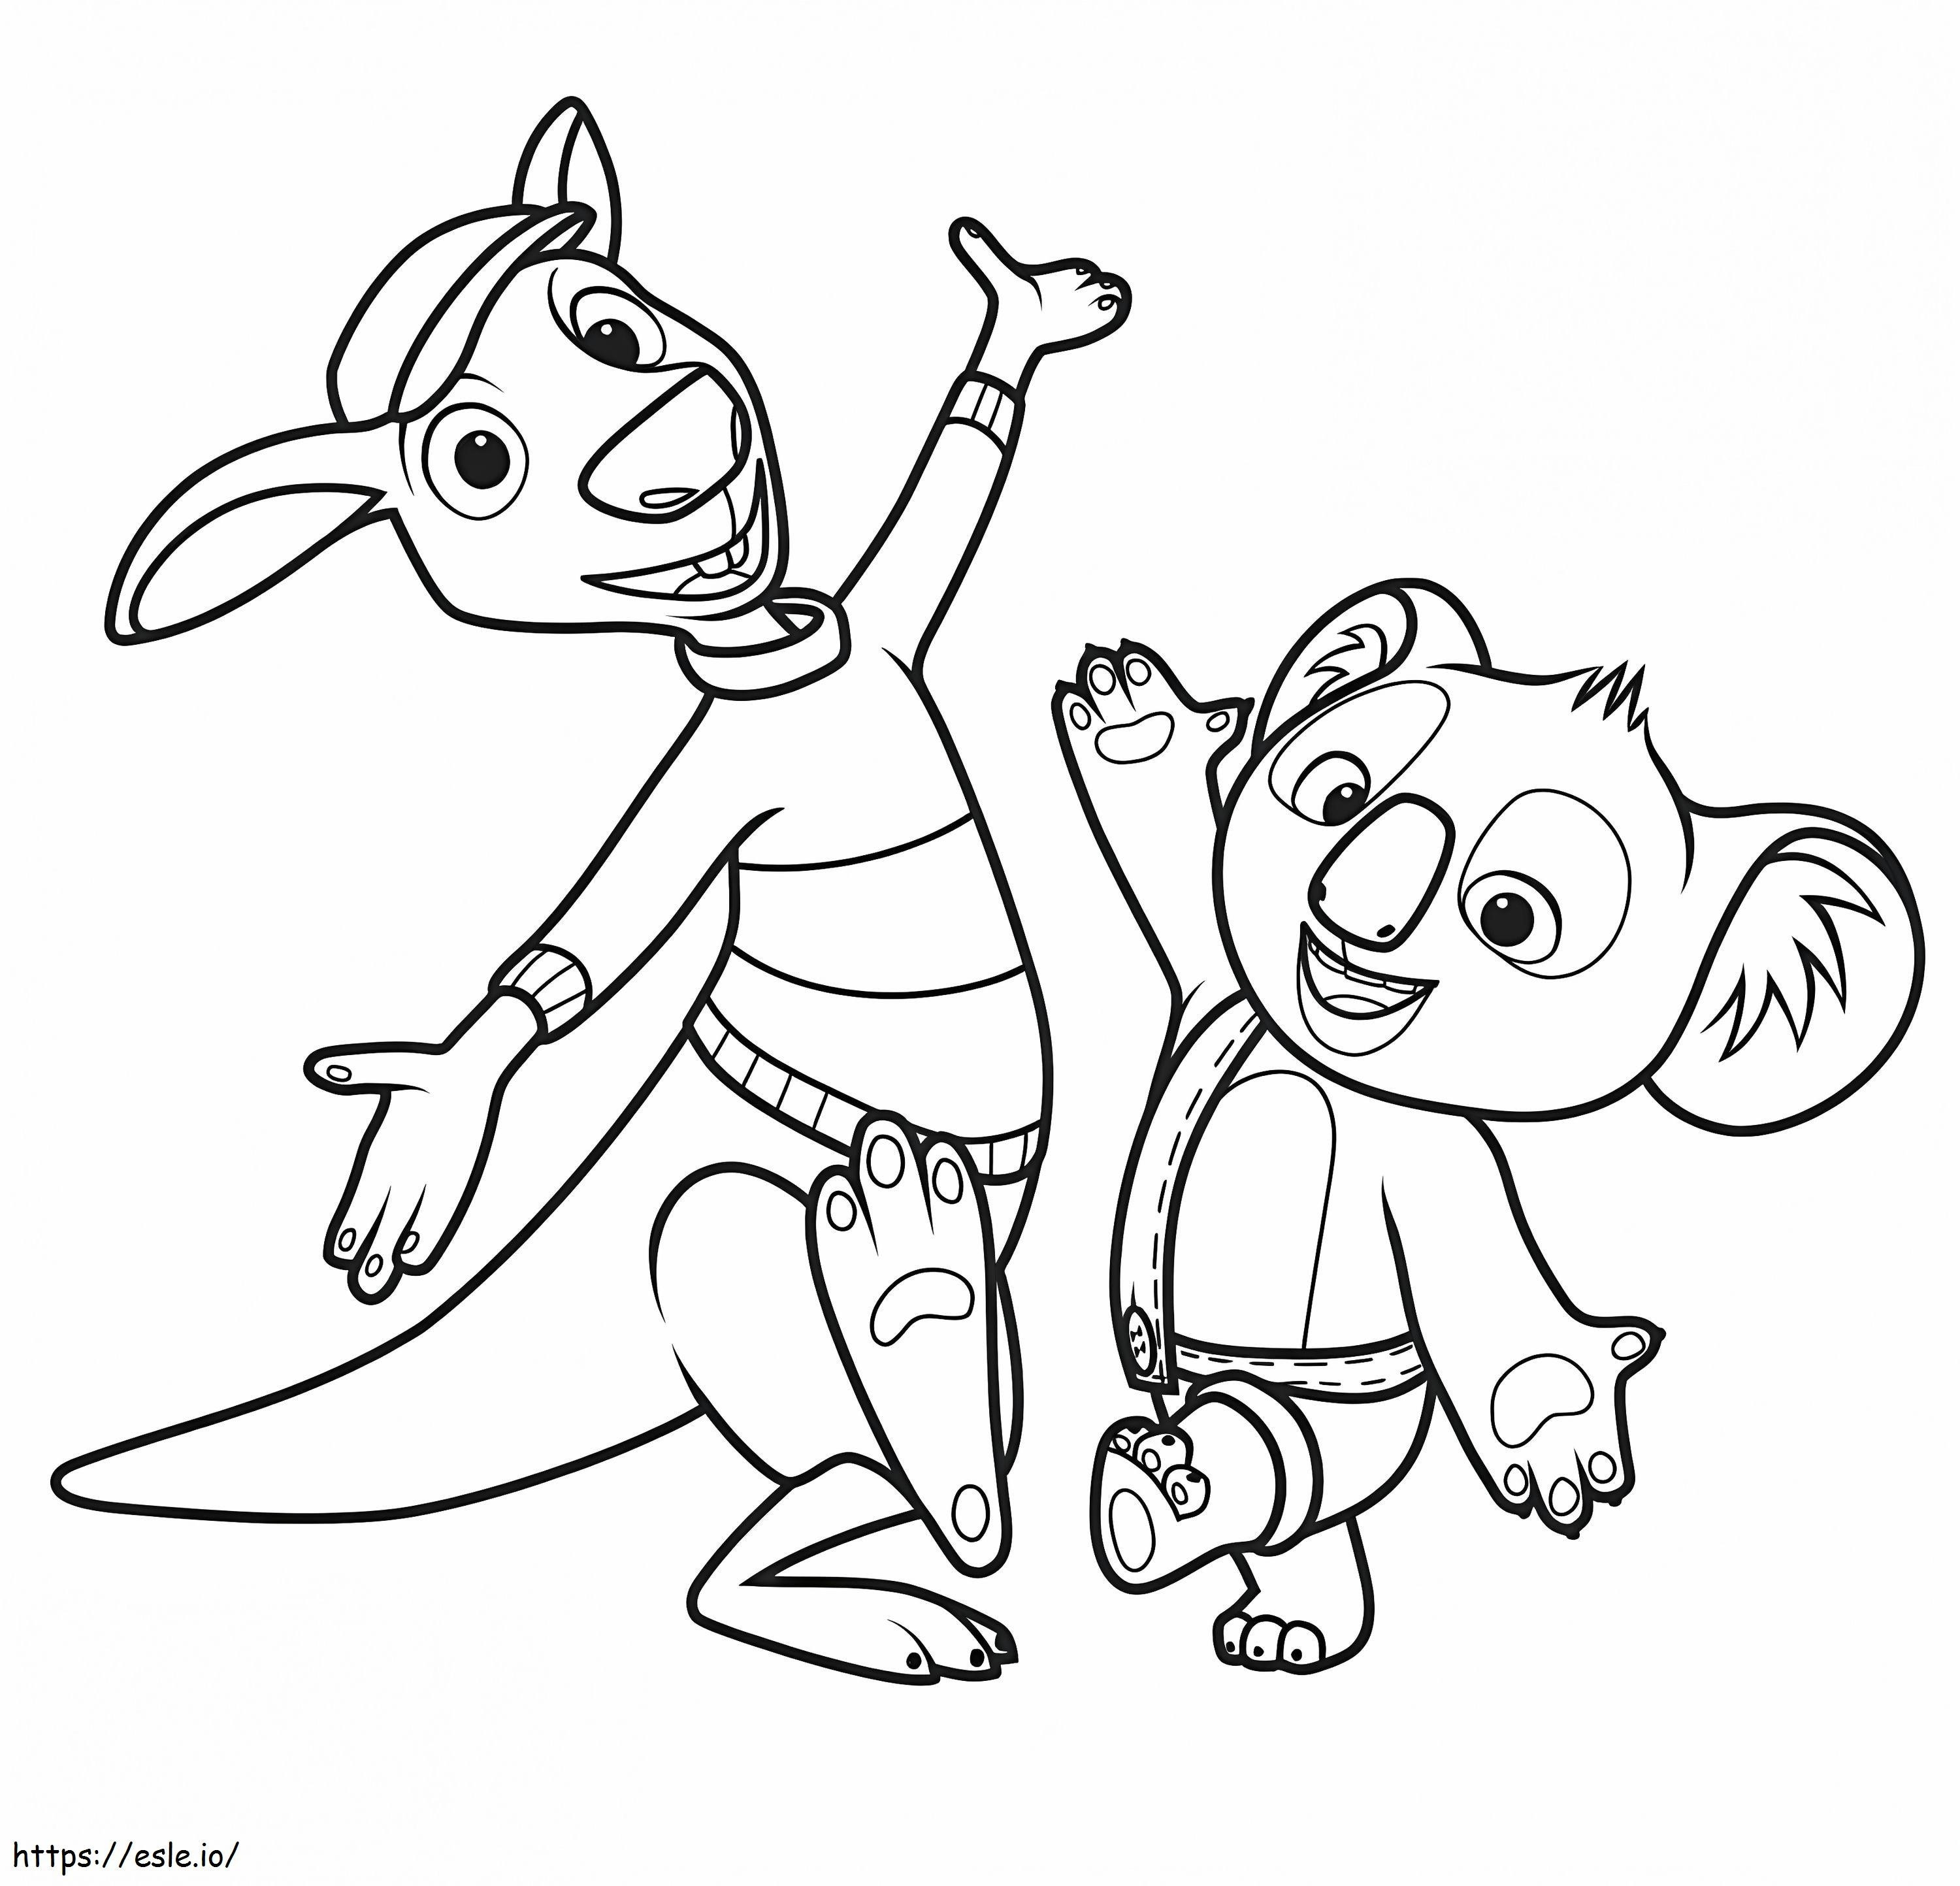 Splodge And Blinky Bill coloring page